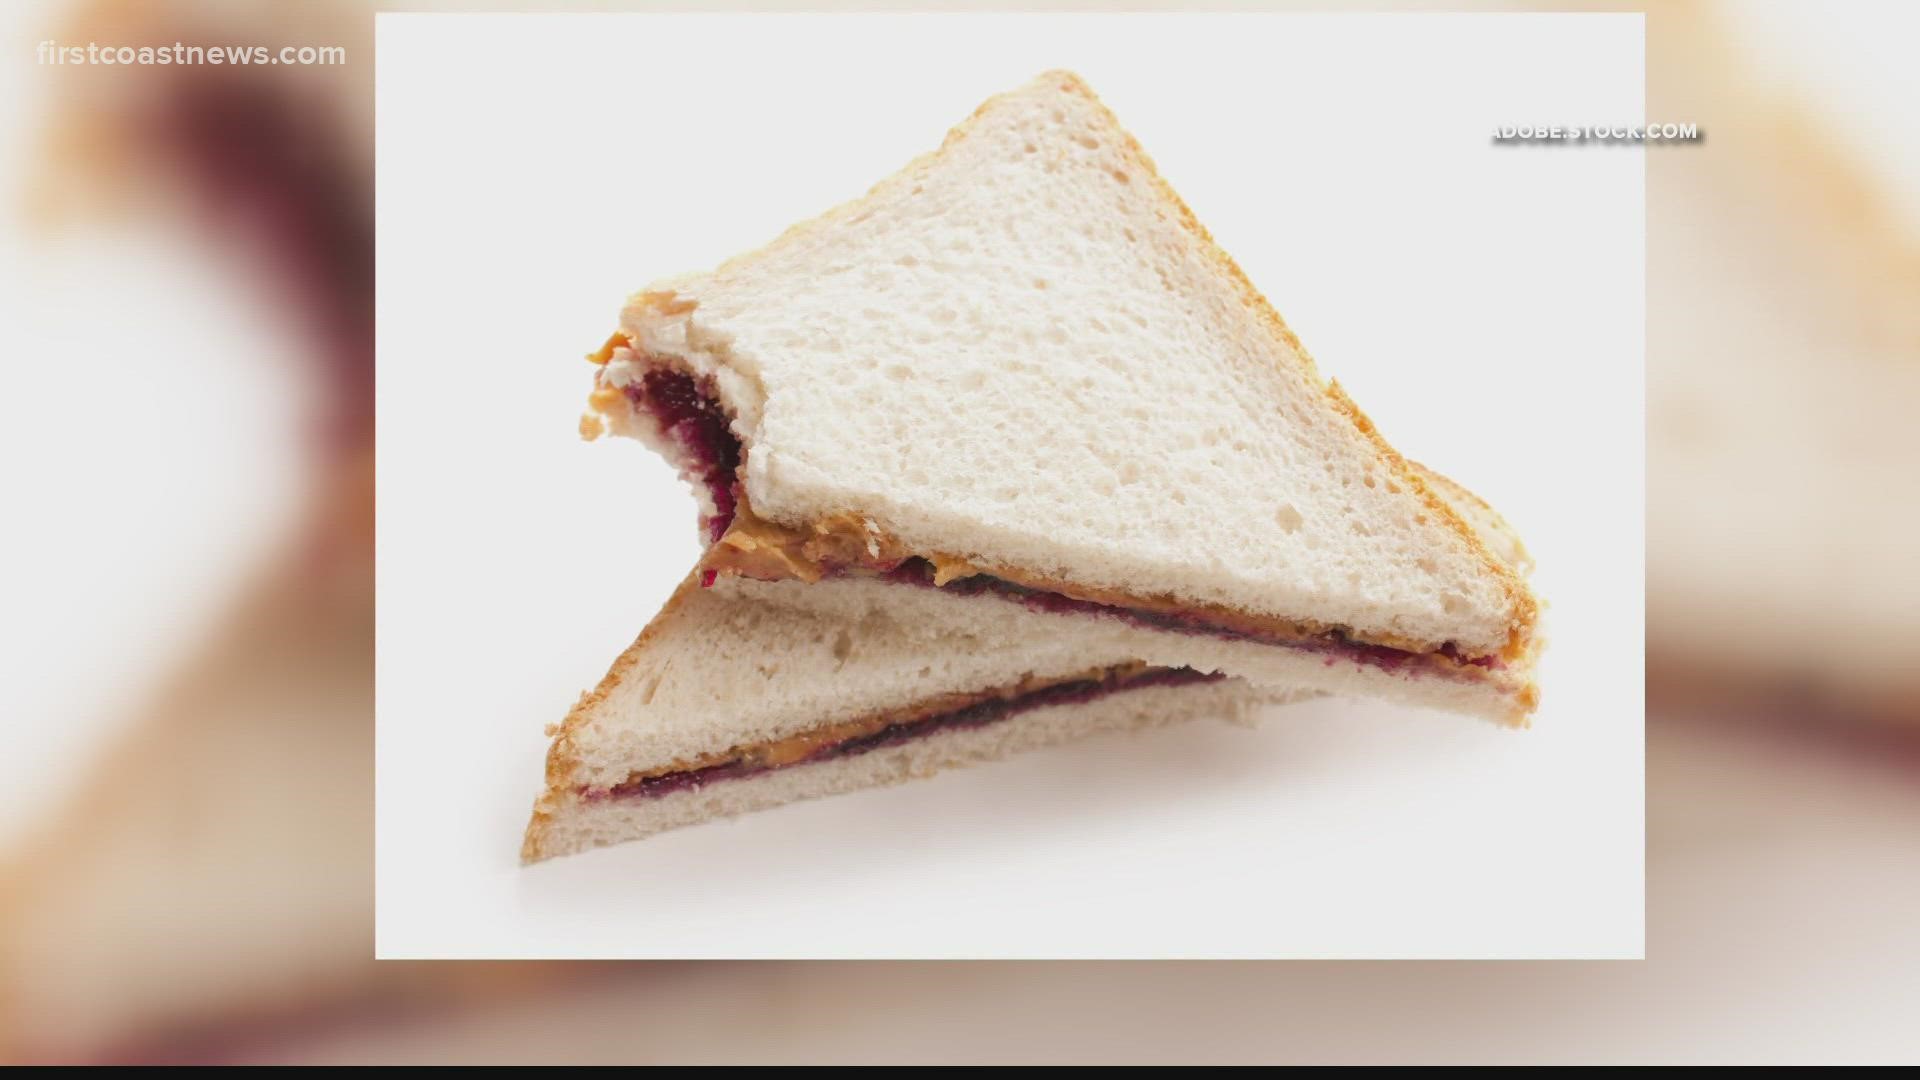 Creamy or crunchy, jam or jelly, white bread or toast? Apparently the key to a perfect PB&J is all about the ratio of peanut butter to jelly: an even 50/50 split.